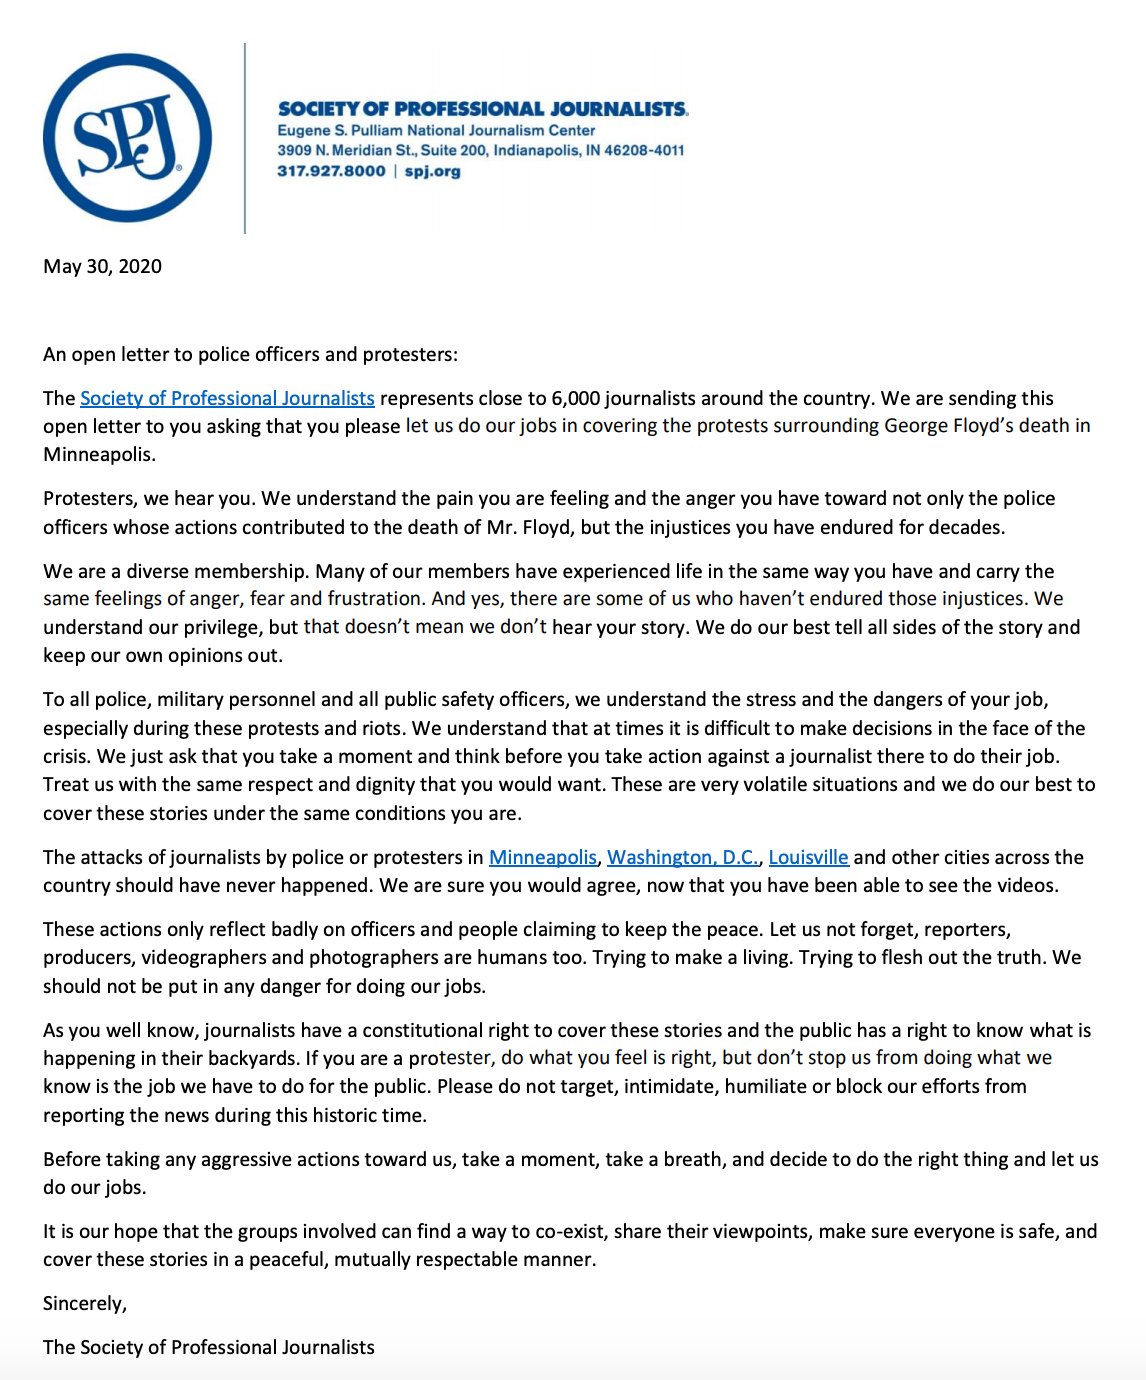 Society Of Professional Journalists Auf Twitter Icymi Spj Wrote An Open Letter To Police And Protesters Asking Them To Let Journalists Covering The Georgefloyd Protests Do Their Jobs The Attacks Of Journalists